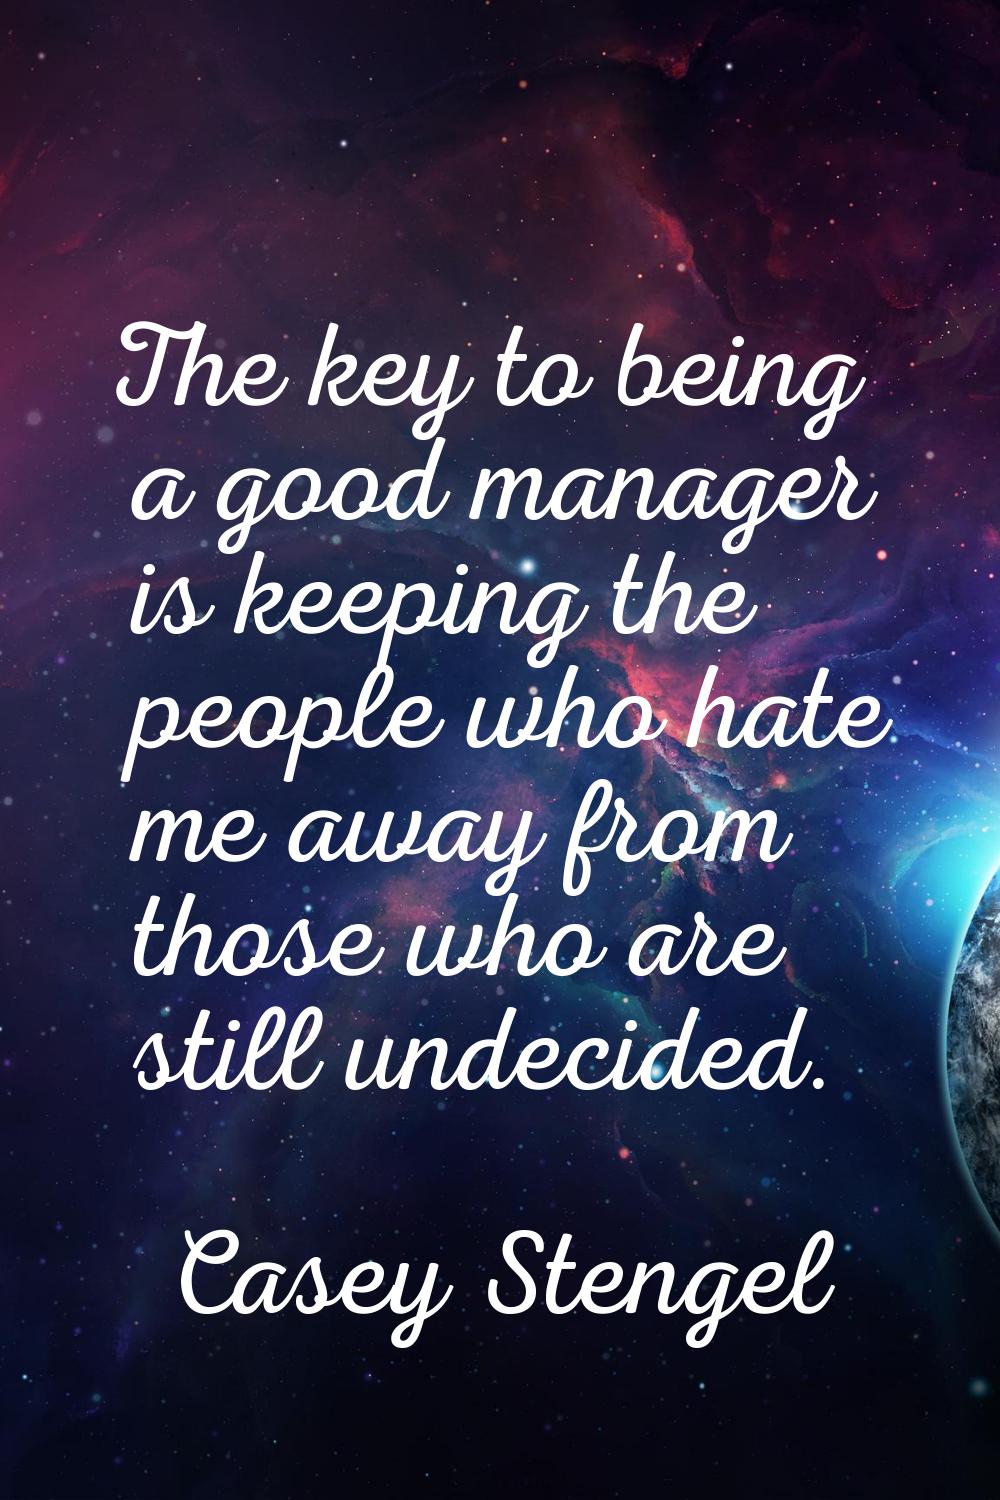 The key to being a good manager is keeping the people who hate me away from those who are still und